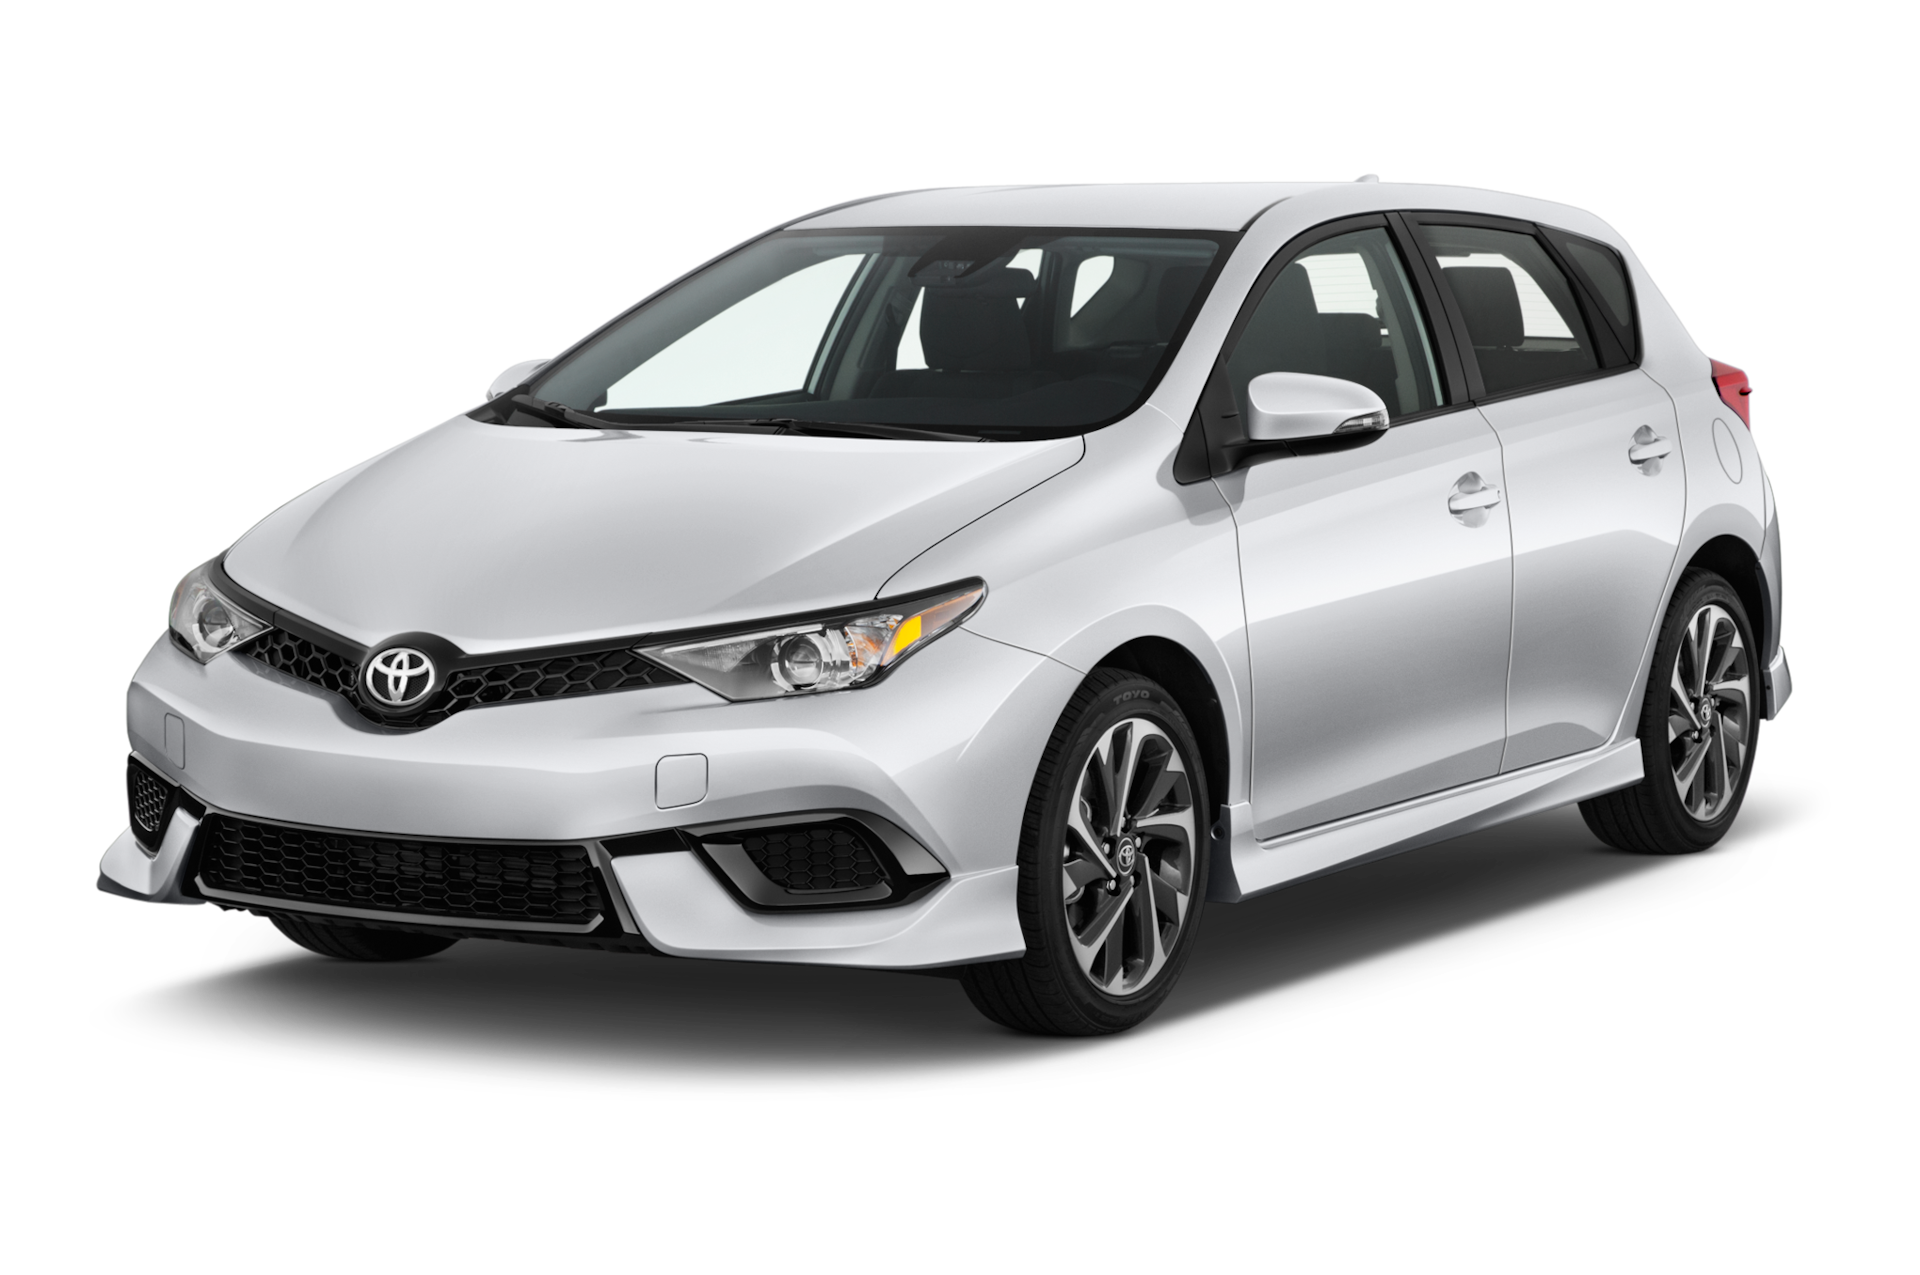 2017 Toyota Corolla iM Prices, Reviews, and Photos - MotorTrend